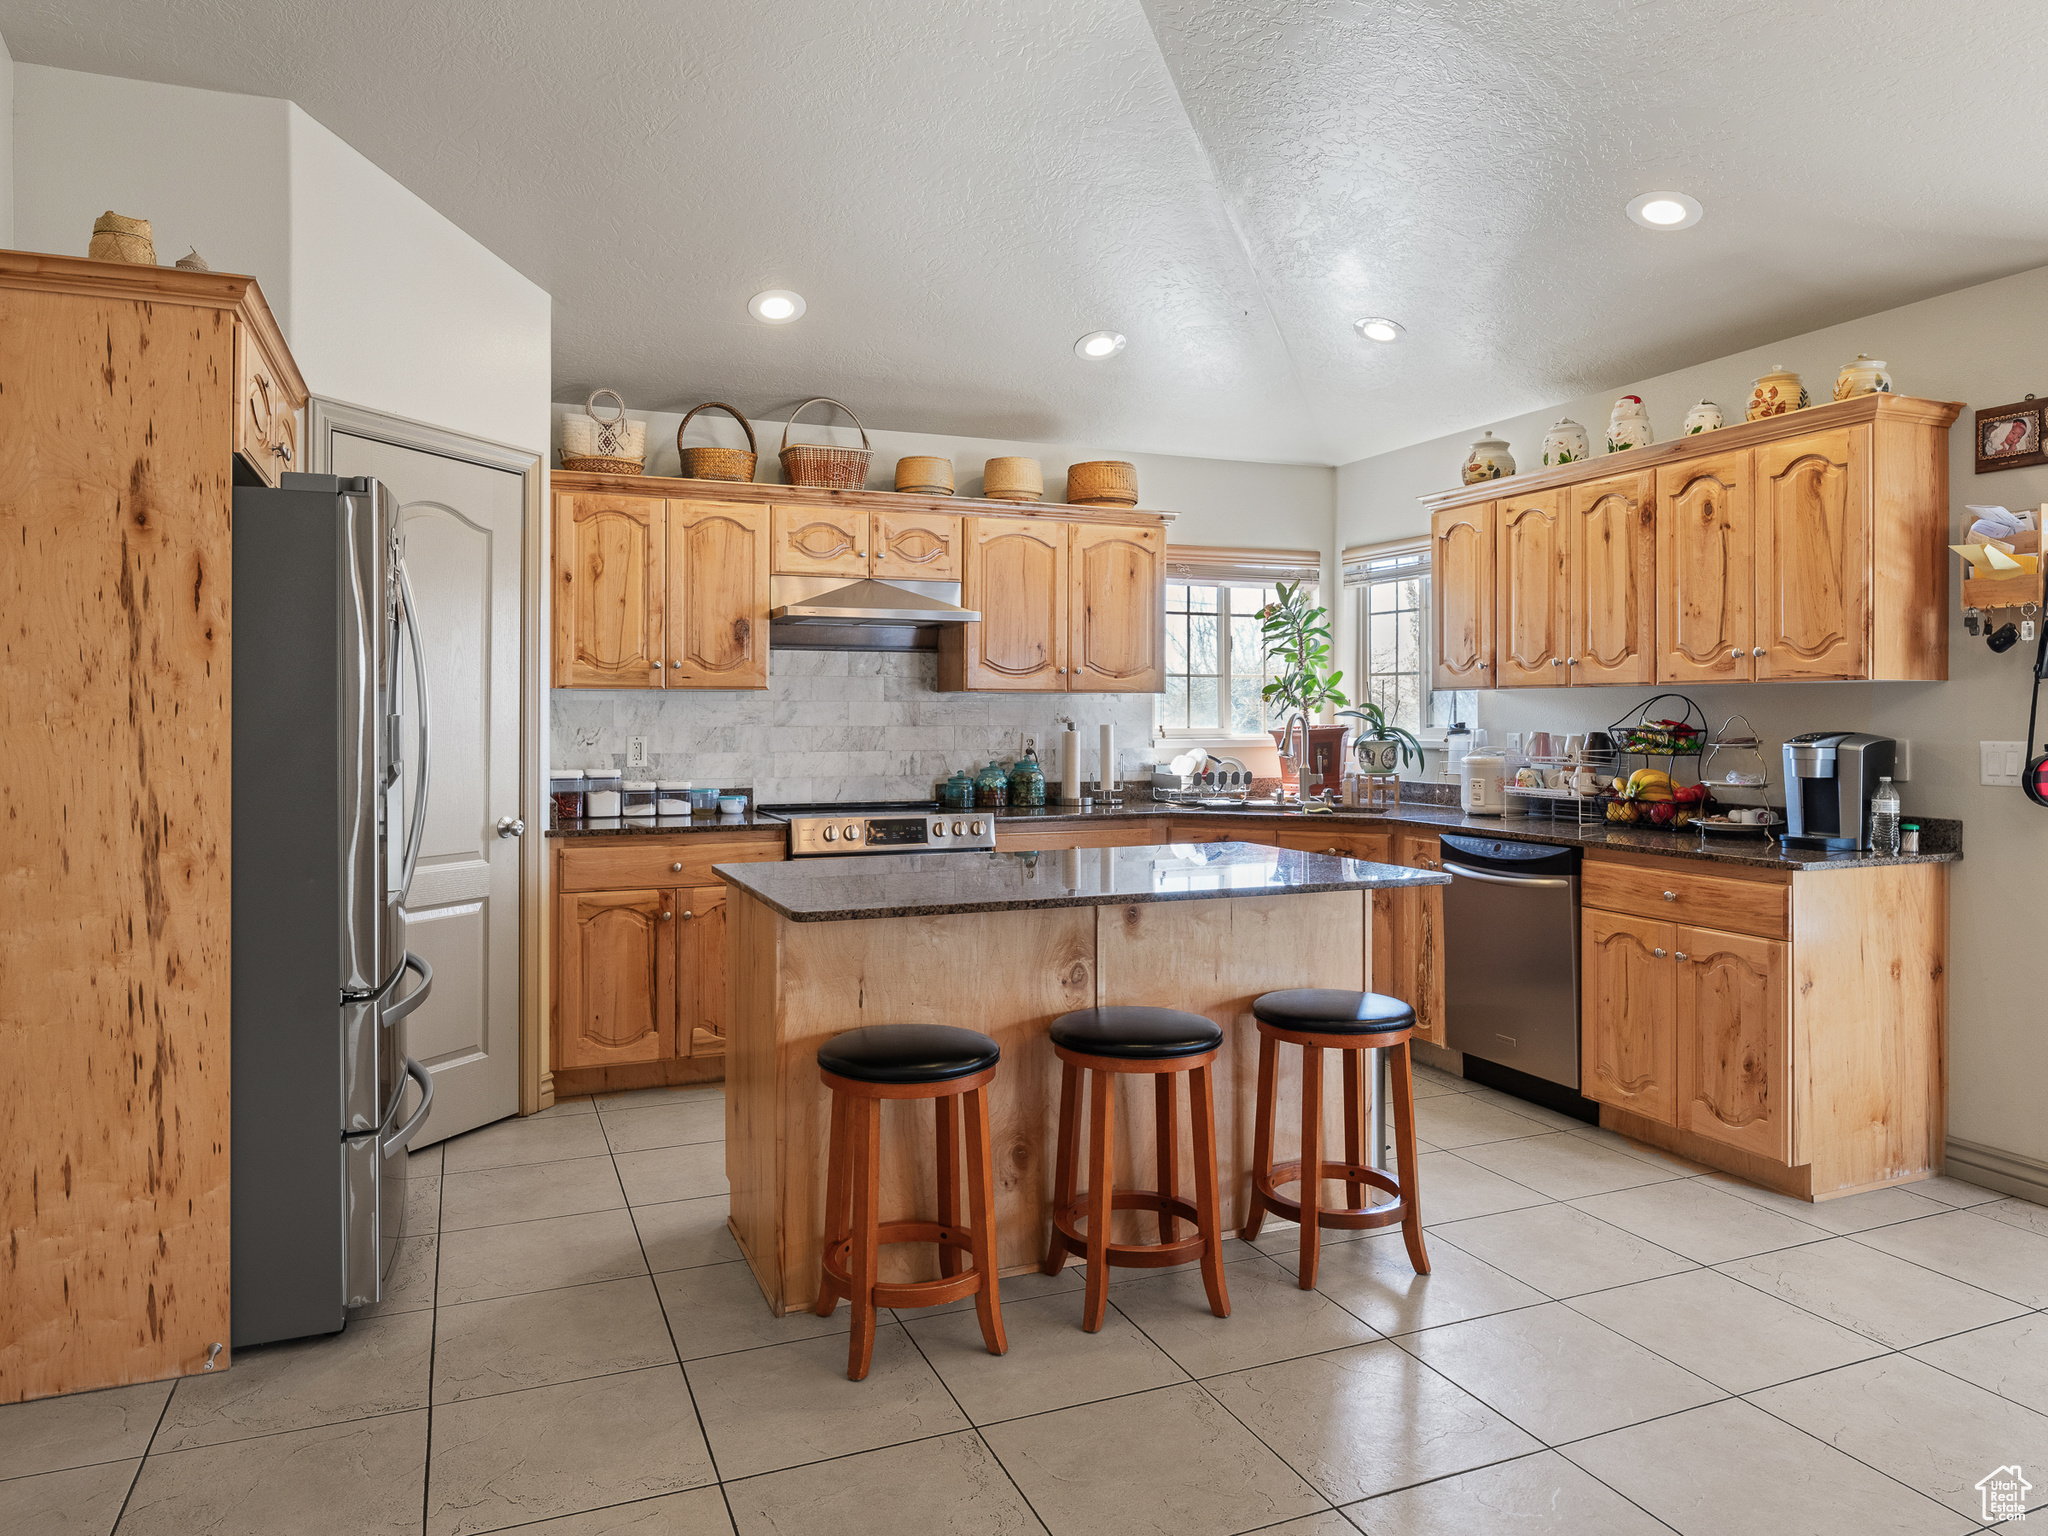 Kitchen featuring appliances with stainless steel finishes, a center island, a kitchen bar, and light tile floors